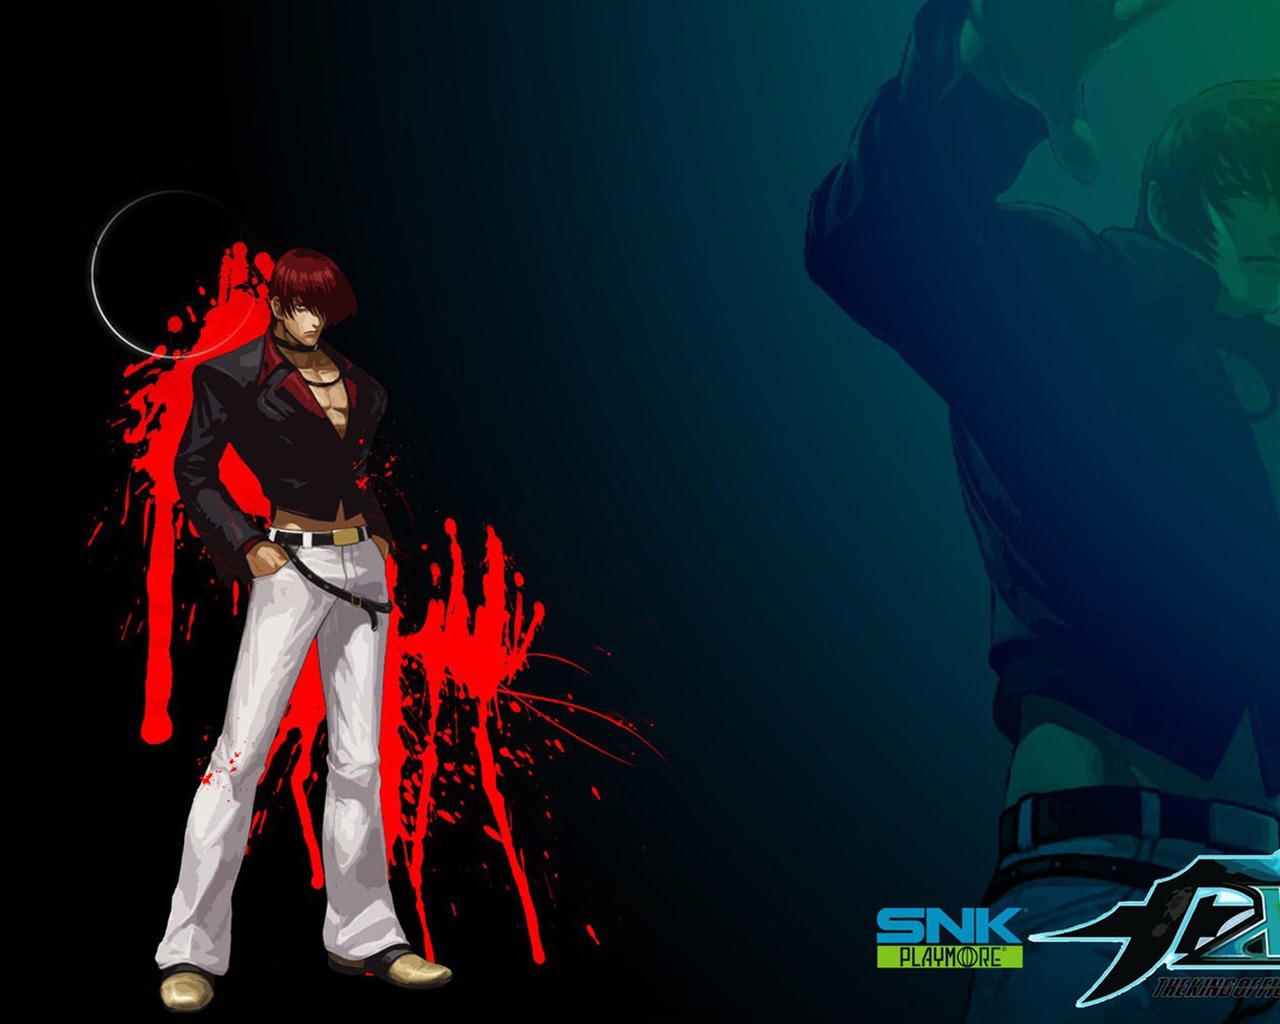 The King of Fighters XIII wallpapers #12 - 1280x1024